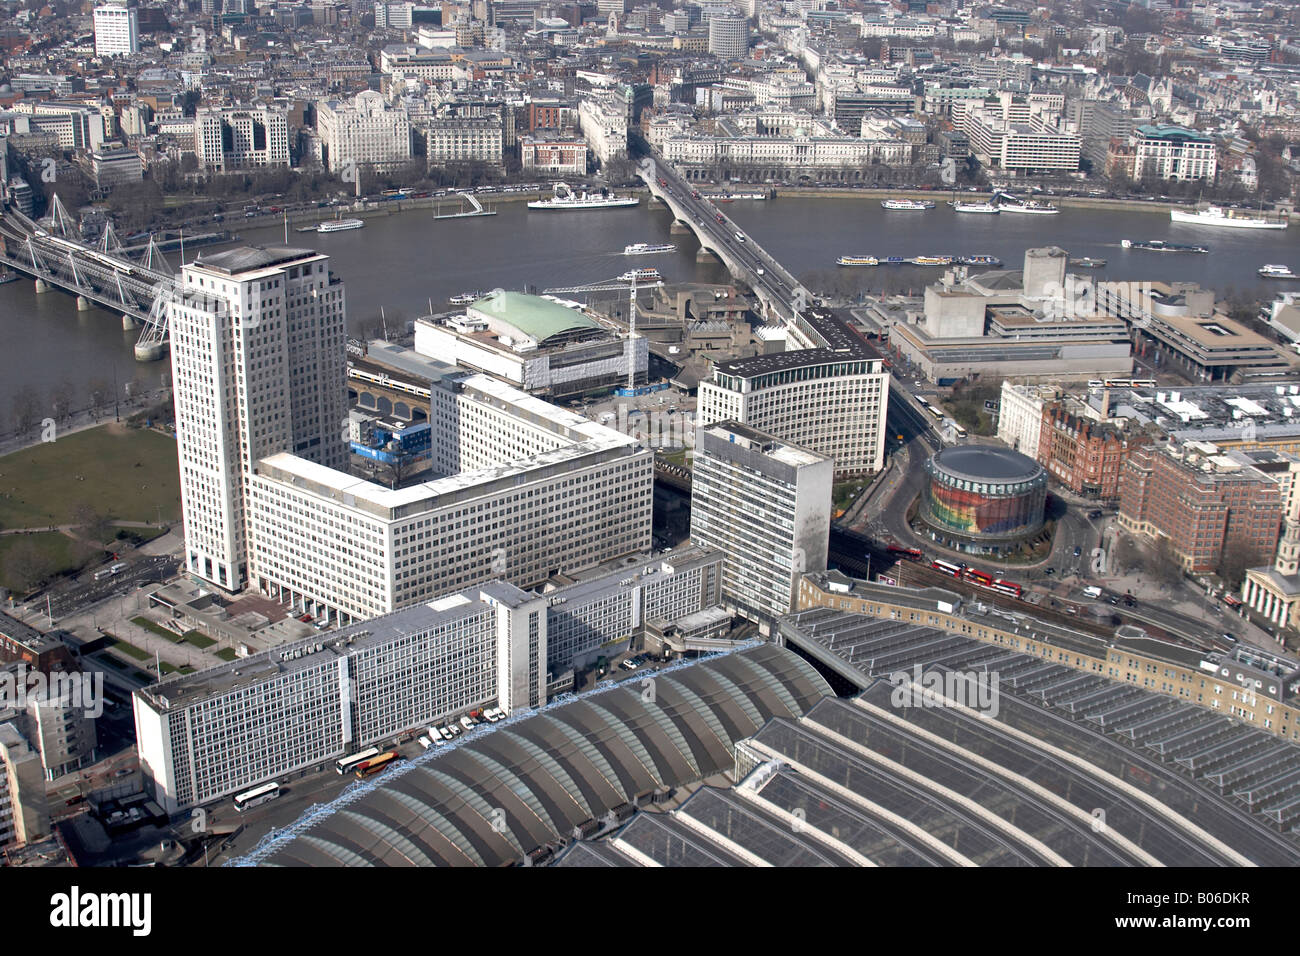 Aerial view north west of Waterloo International Station South Bank Centre Royal Festival Hall Hungerford Waterloo Bridges Lambe Stock Photo